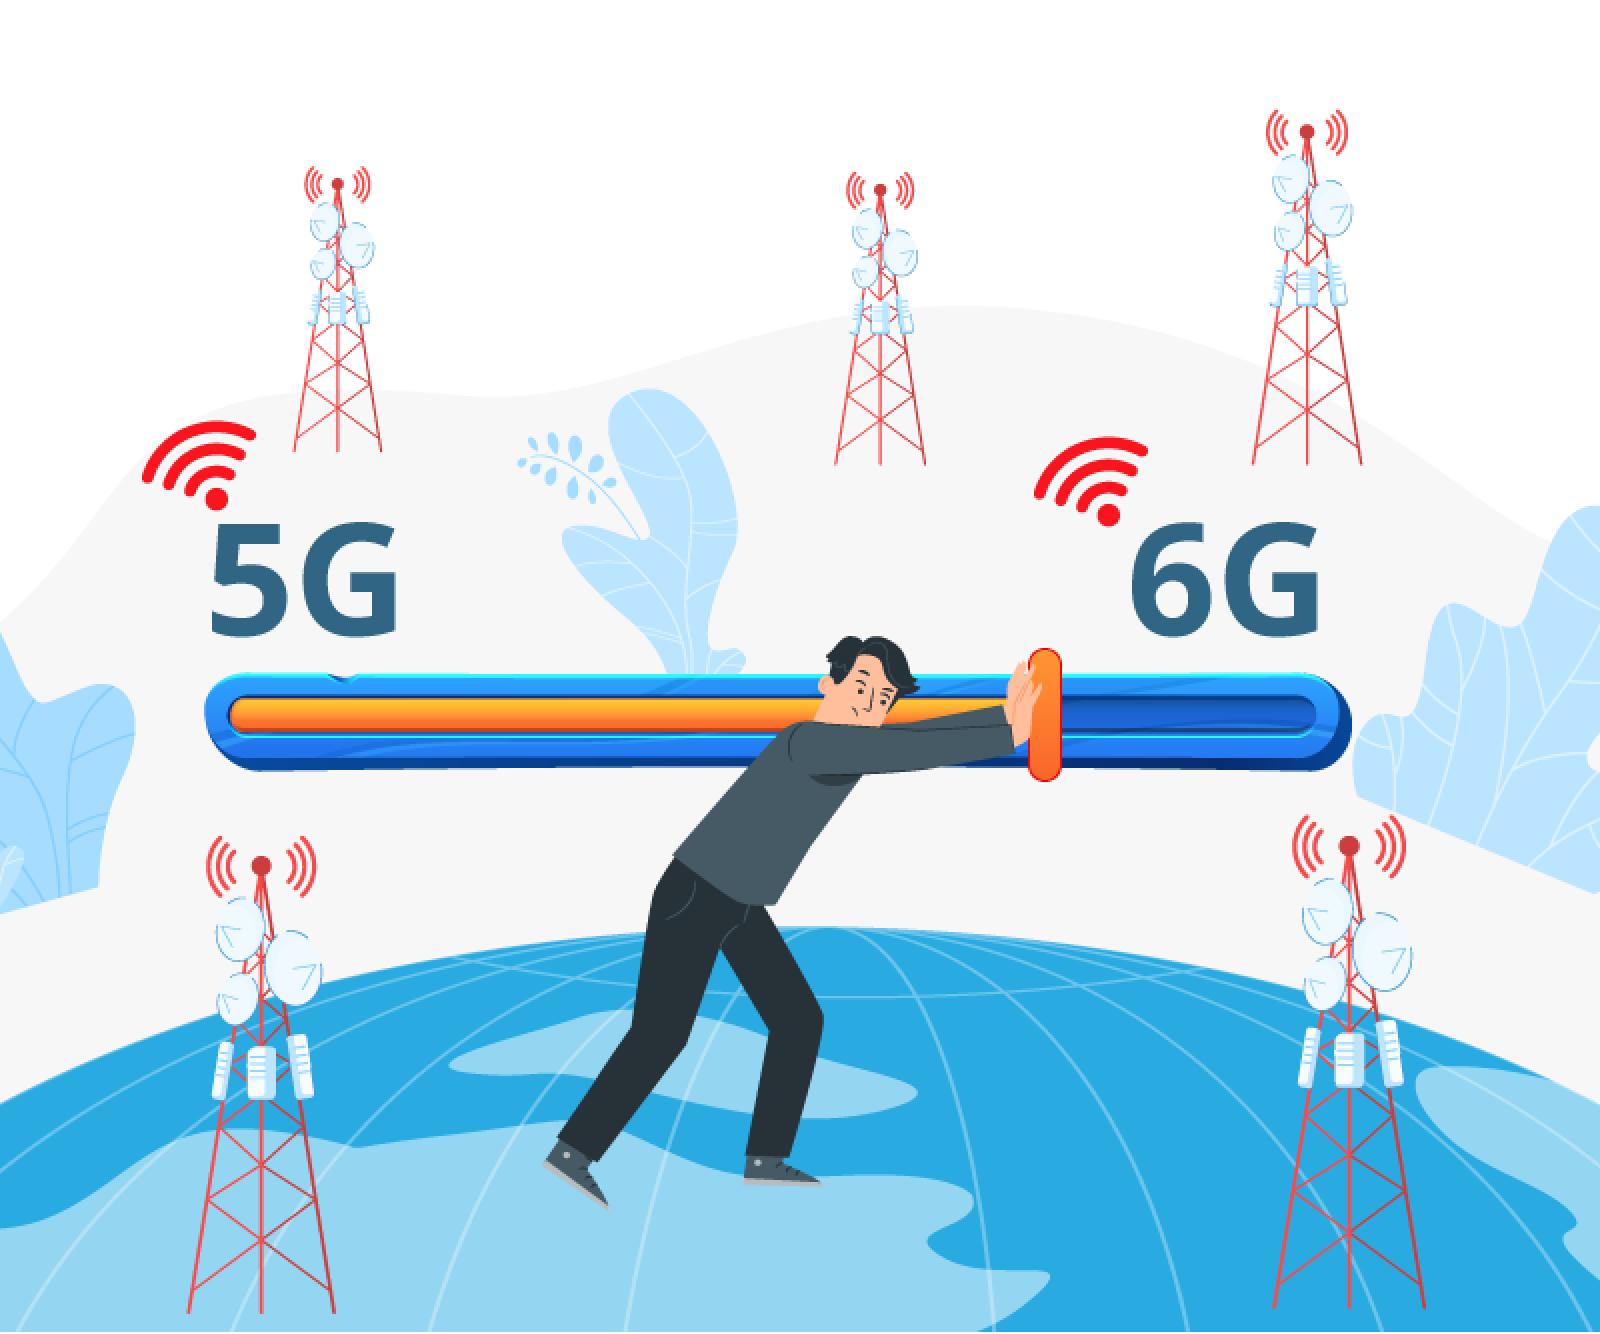 Image illustrating the evolution from 4G to 5G networks, highlighting advancements in connectivity.